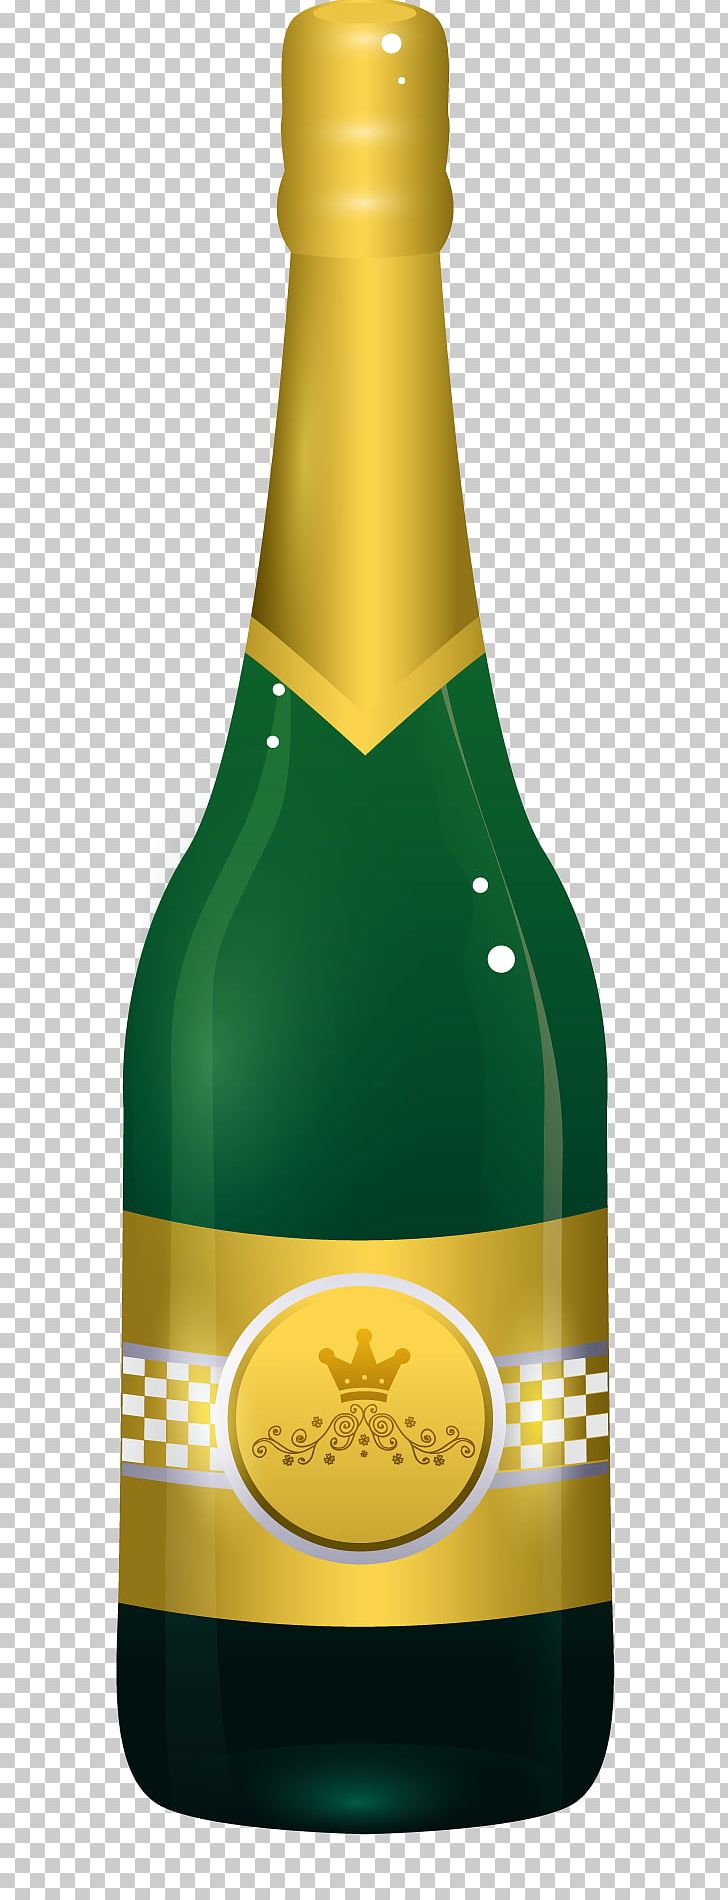 Red Wine Champagne Beer Bottle PNG, Clipart, Alcohol, Alcoholic Drink, Beer, Bottle, Champagne Free PNG Download